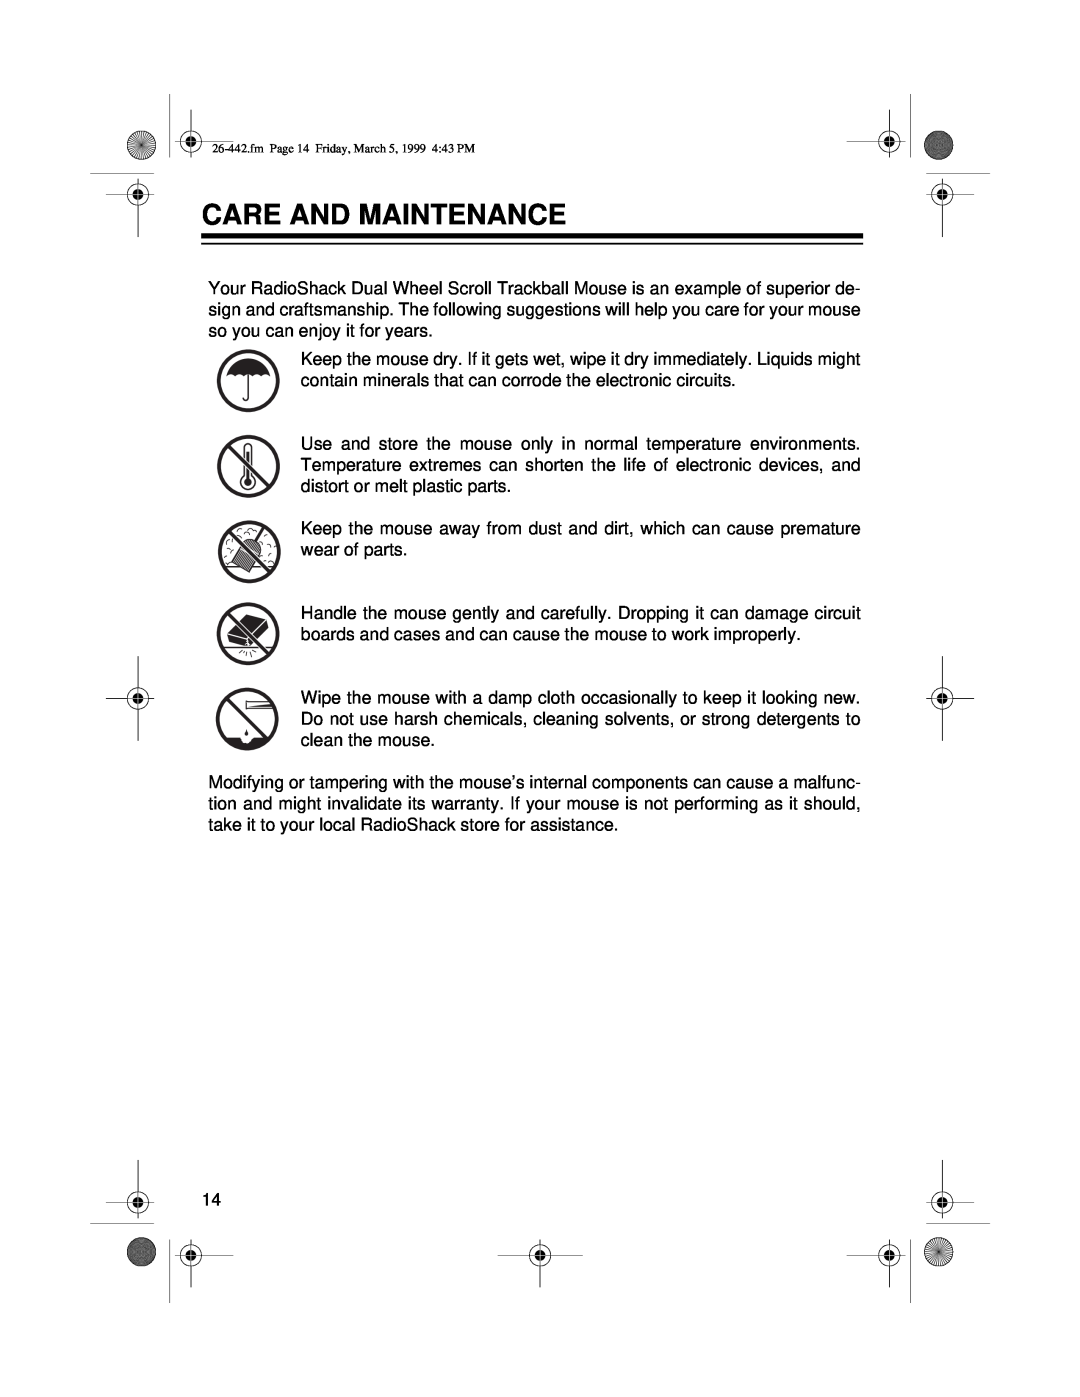 Radio Shack 26-442 owner manual Care And Maintenance, fm Page 14 Friday, March 5, 1999 443 PM 